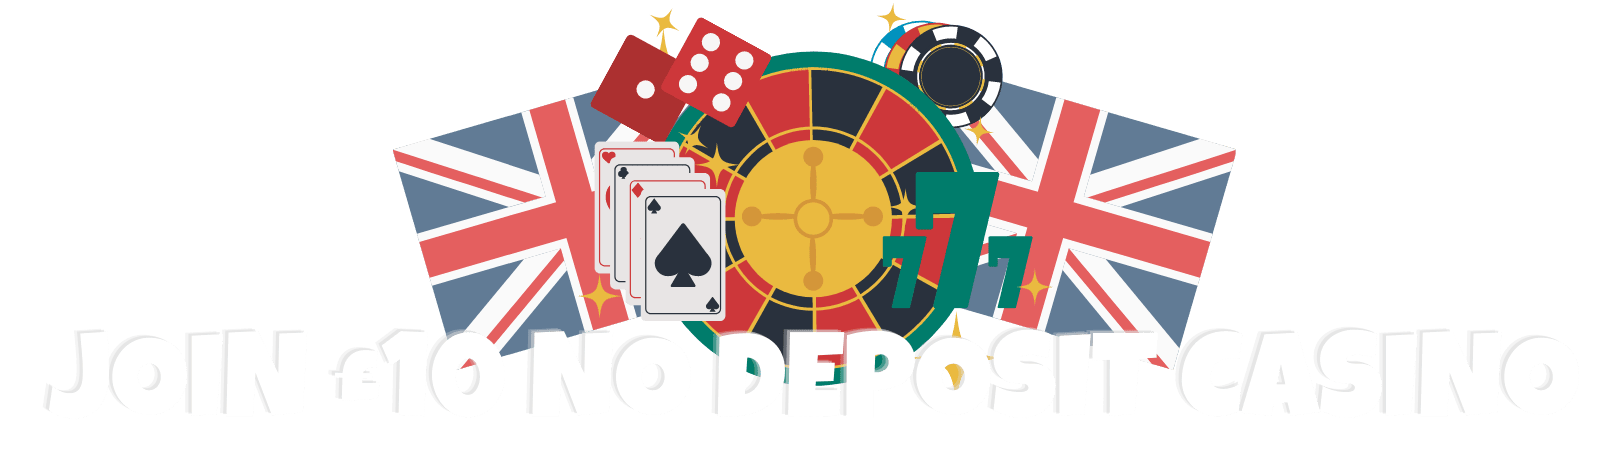 why join 10 no deposit casino img